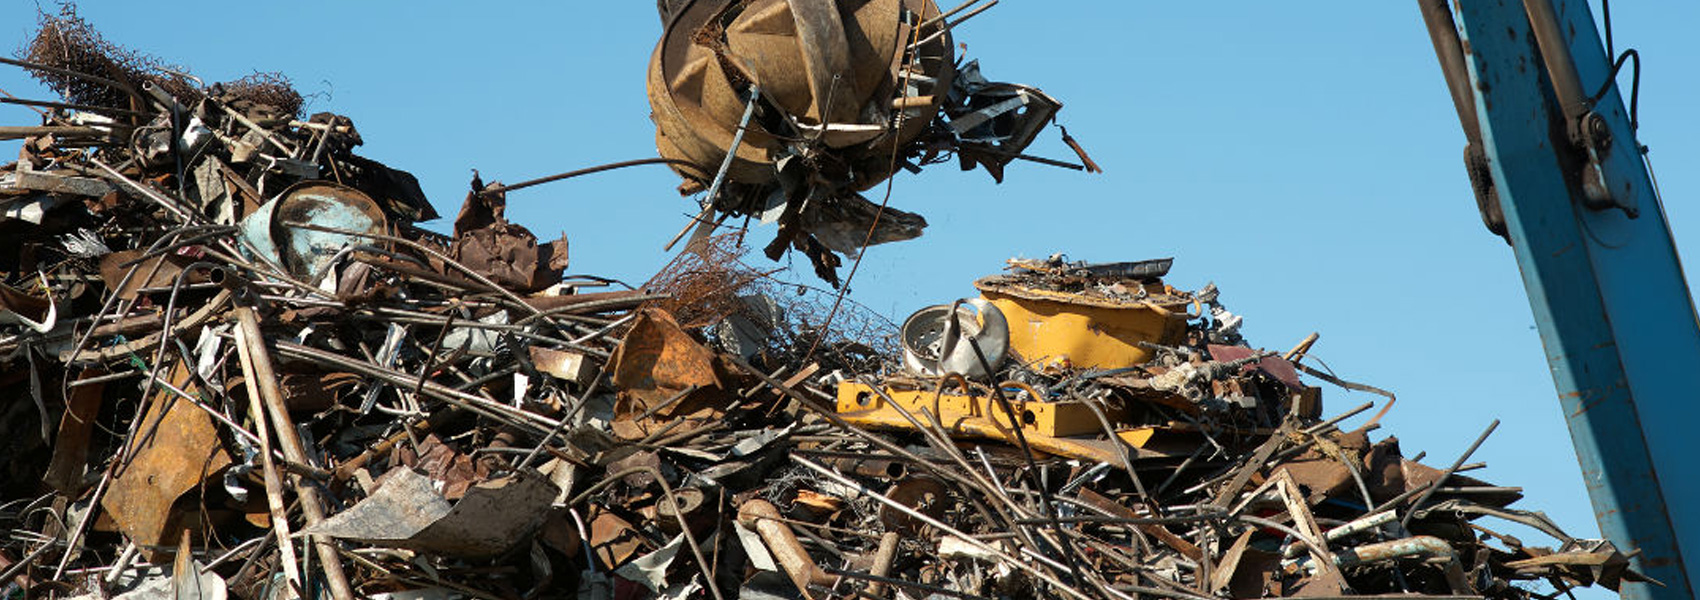 How to Start Your Own Scrap Metal Collecting Business